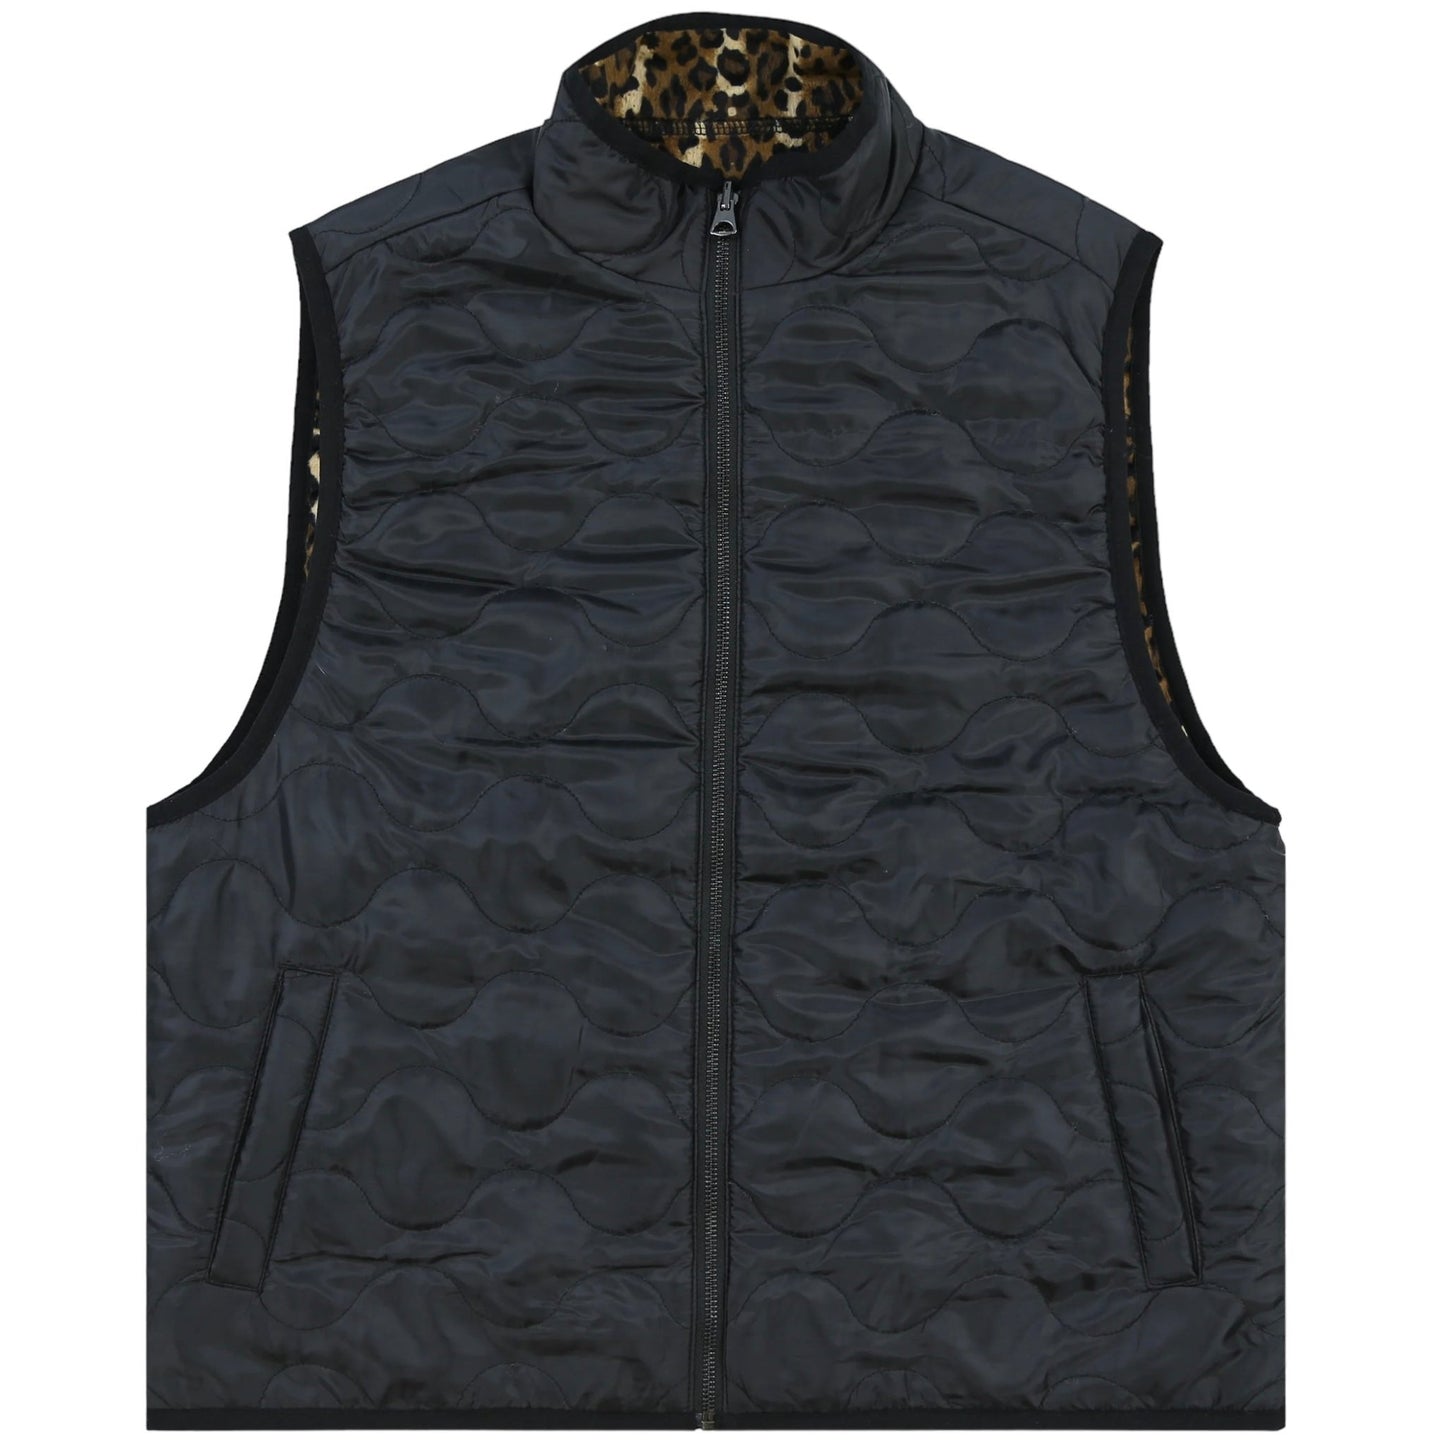 A black quilted polyester PLEASURES vest with cheetah fabric.